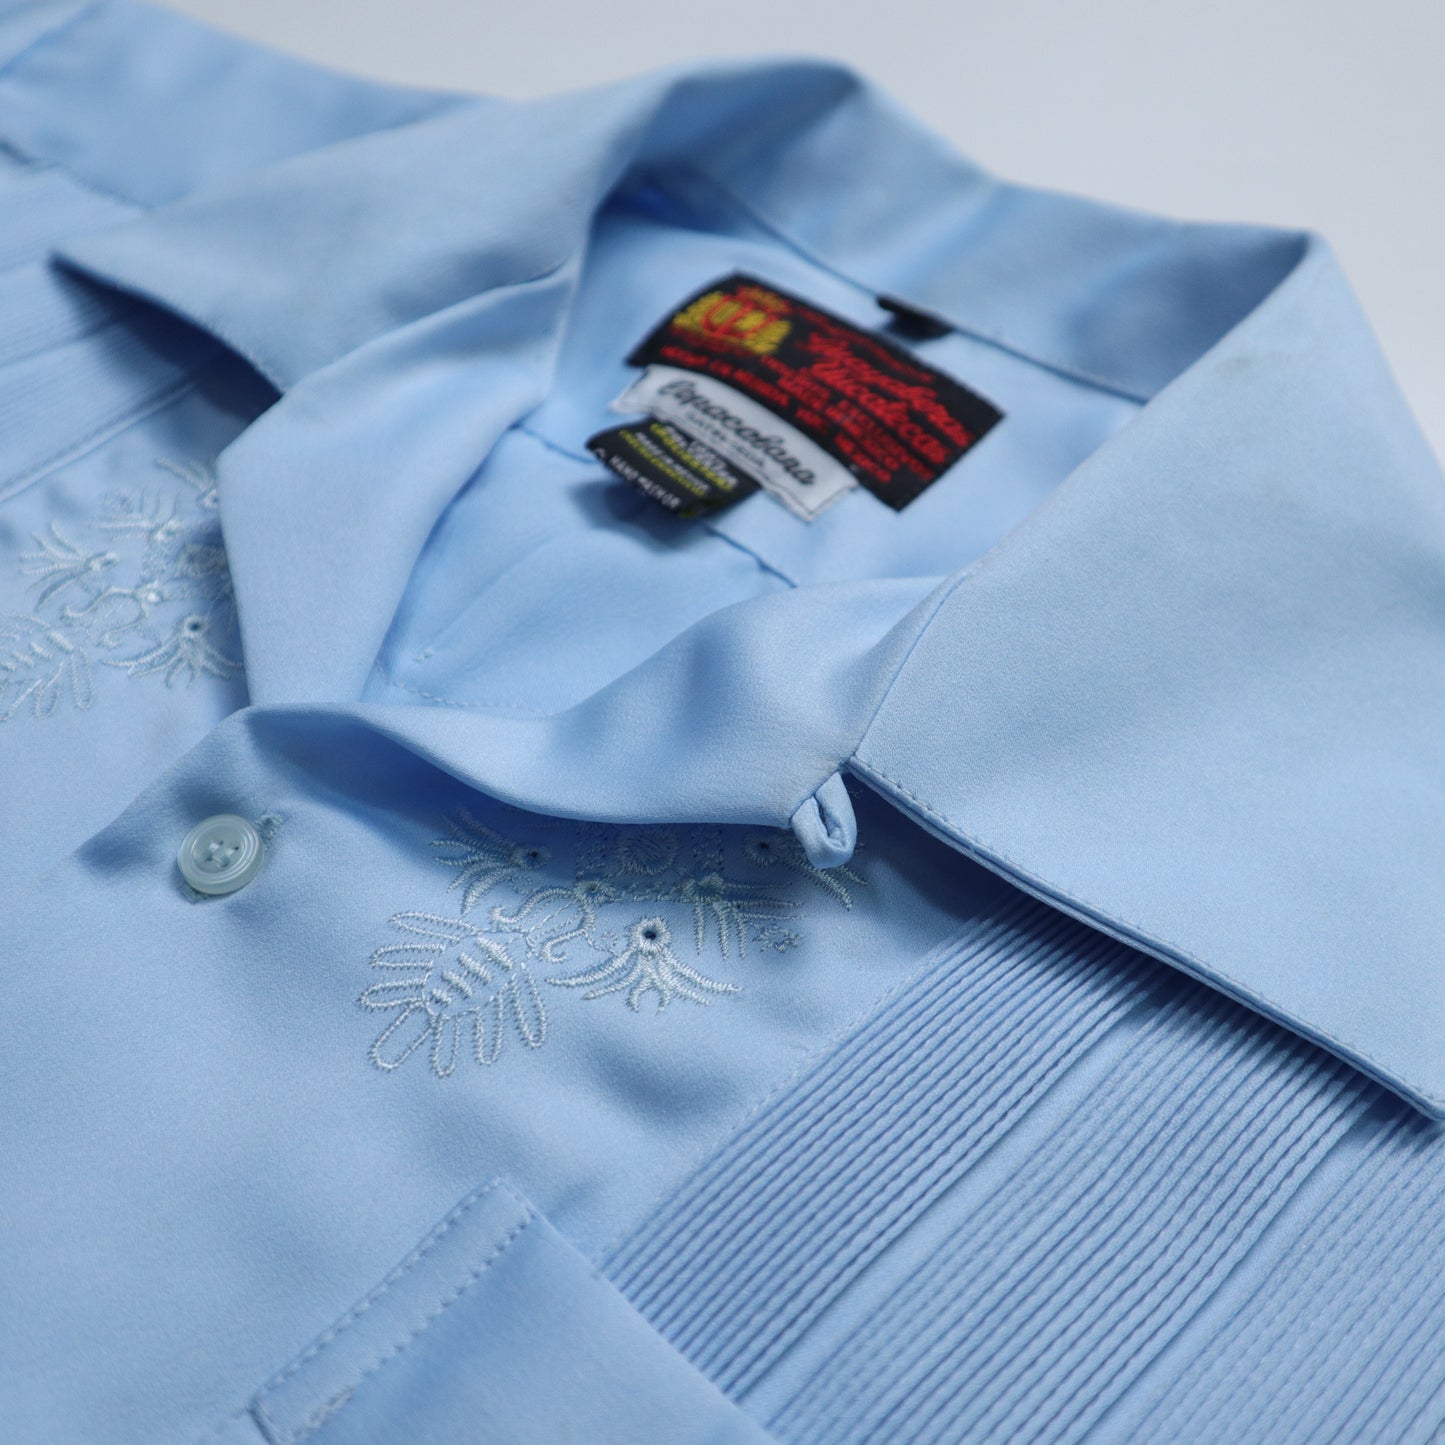 80s/90s aqua blue embroidered three-dimensional striped Cuban shirt made in Mexico